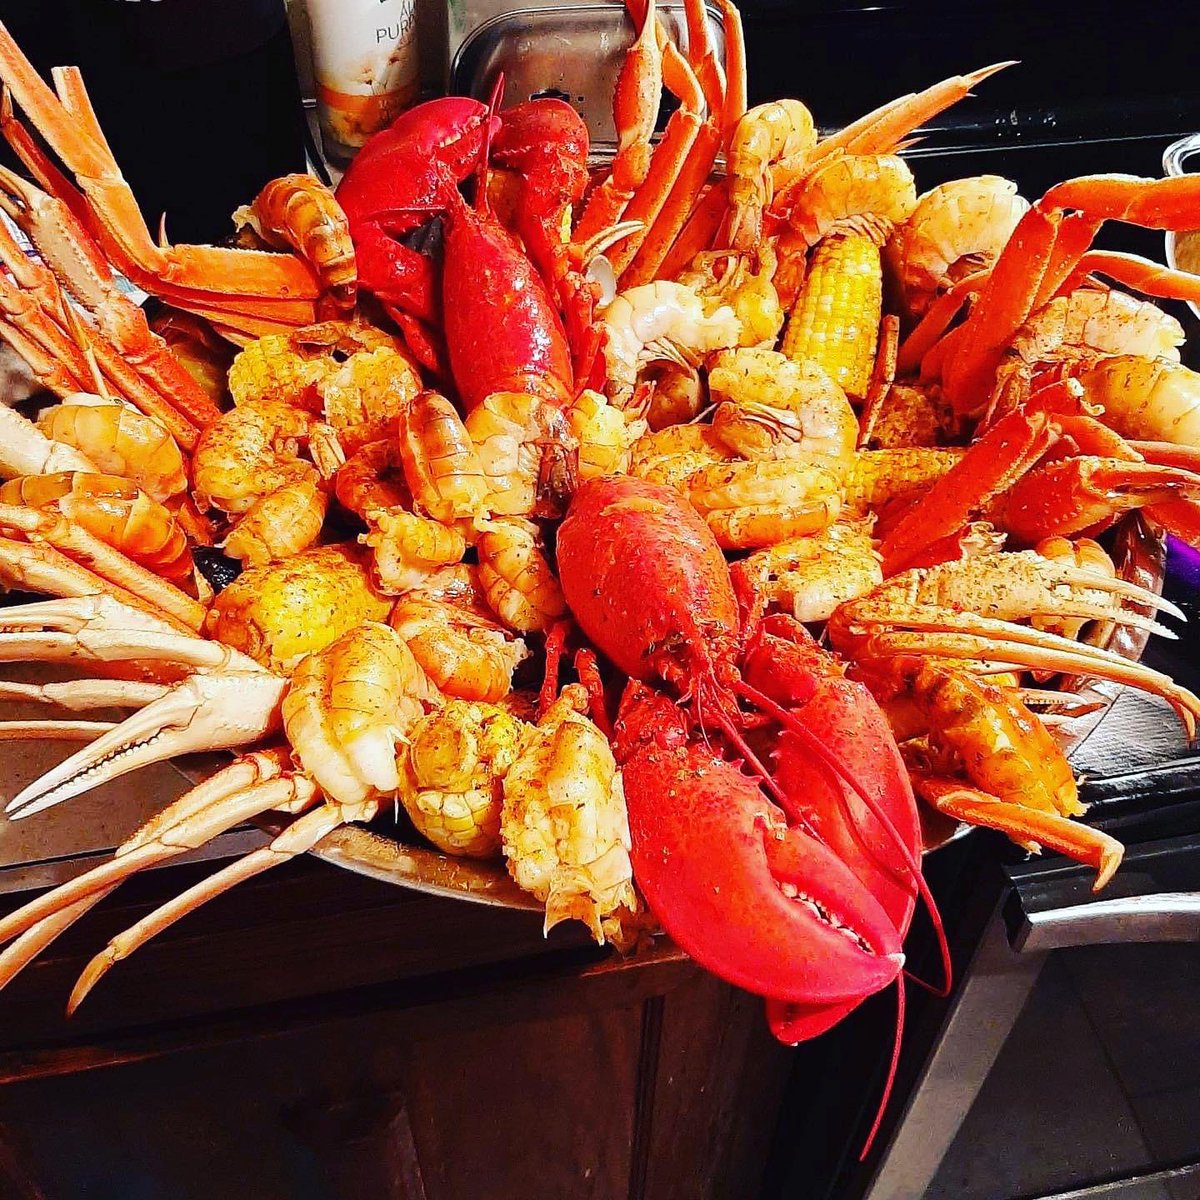 But Where are MY SEAFOOD LOVERS @ stop playing with me ! We ship seafood ANY & EVERY where !! #Lobsterlovers #Seafood  #Crablegs #Shrimp #Seafoodboils #Strategic@EVERYTHING